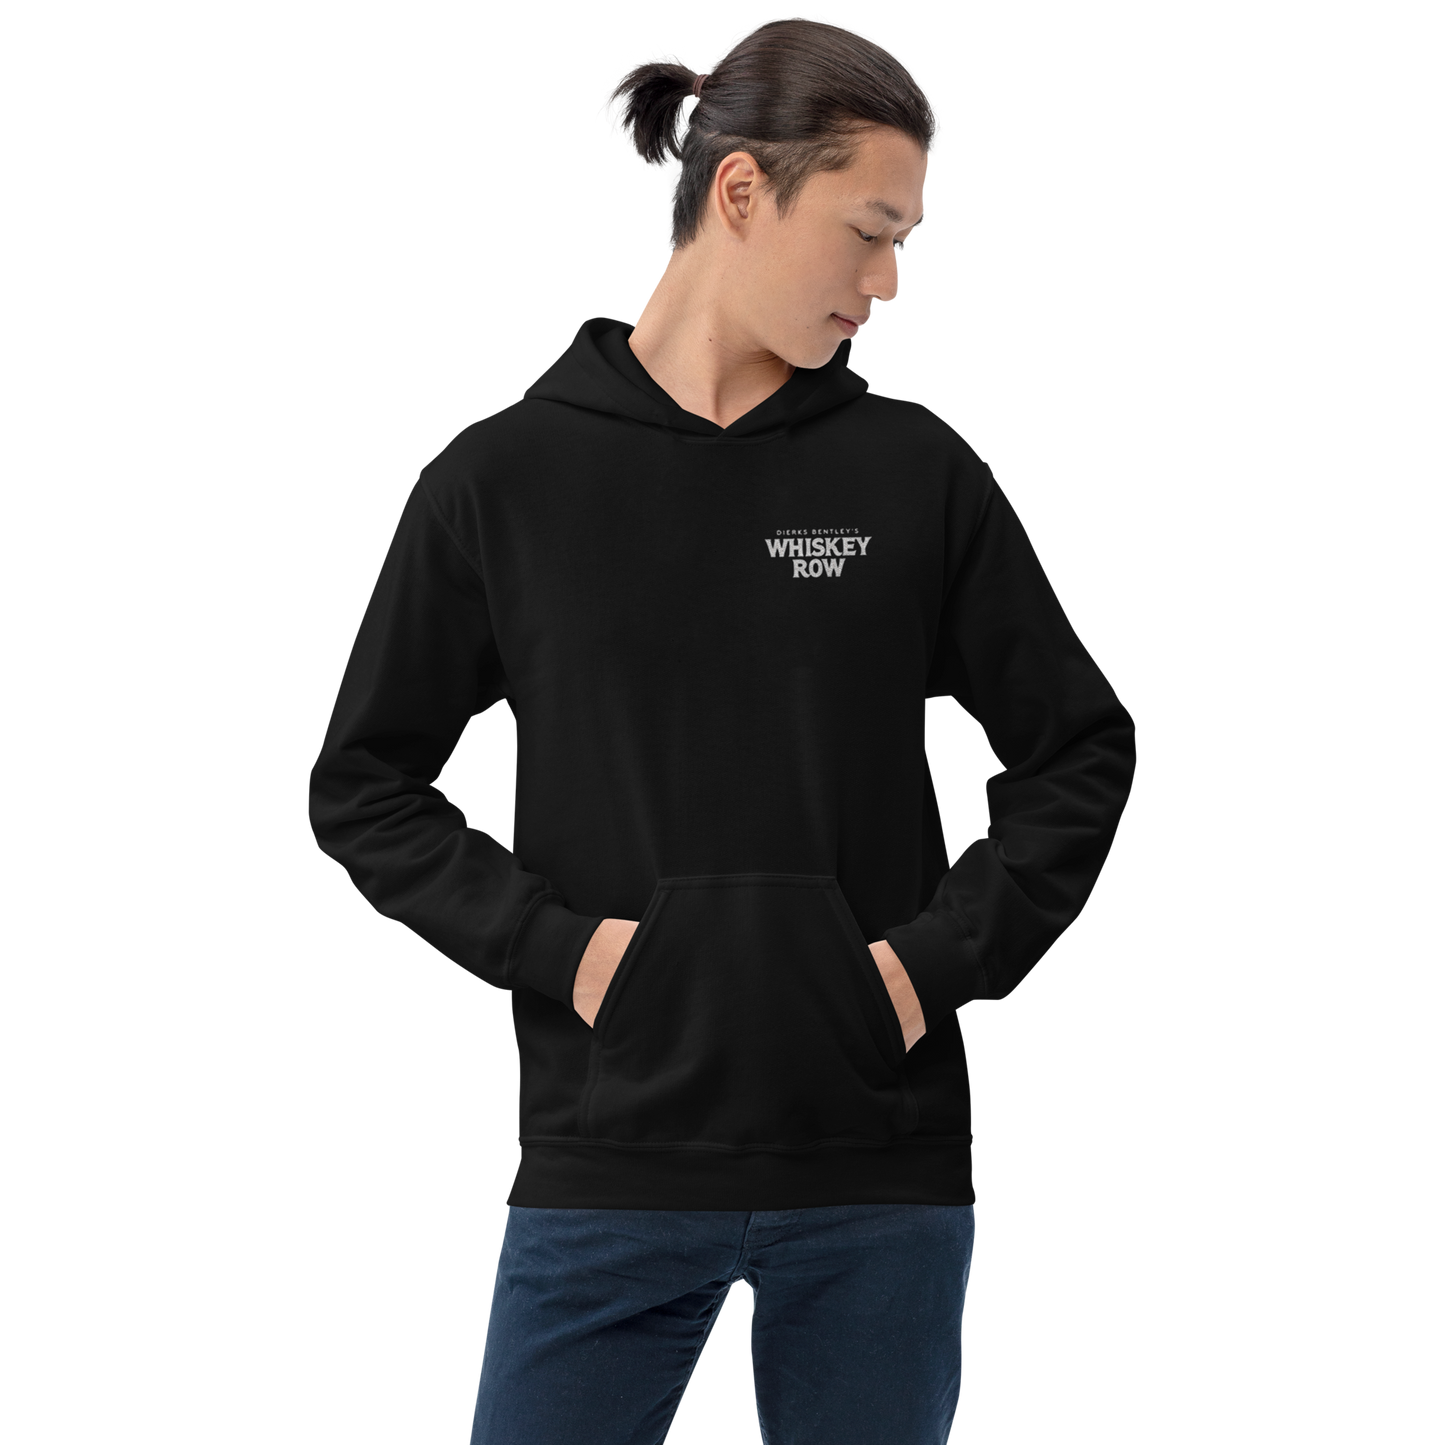 person wearing Whiskey Row Black Hoodie front view